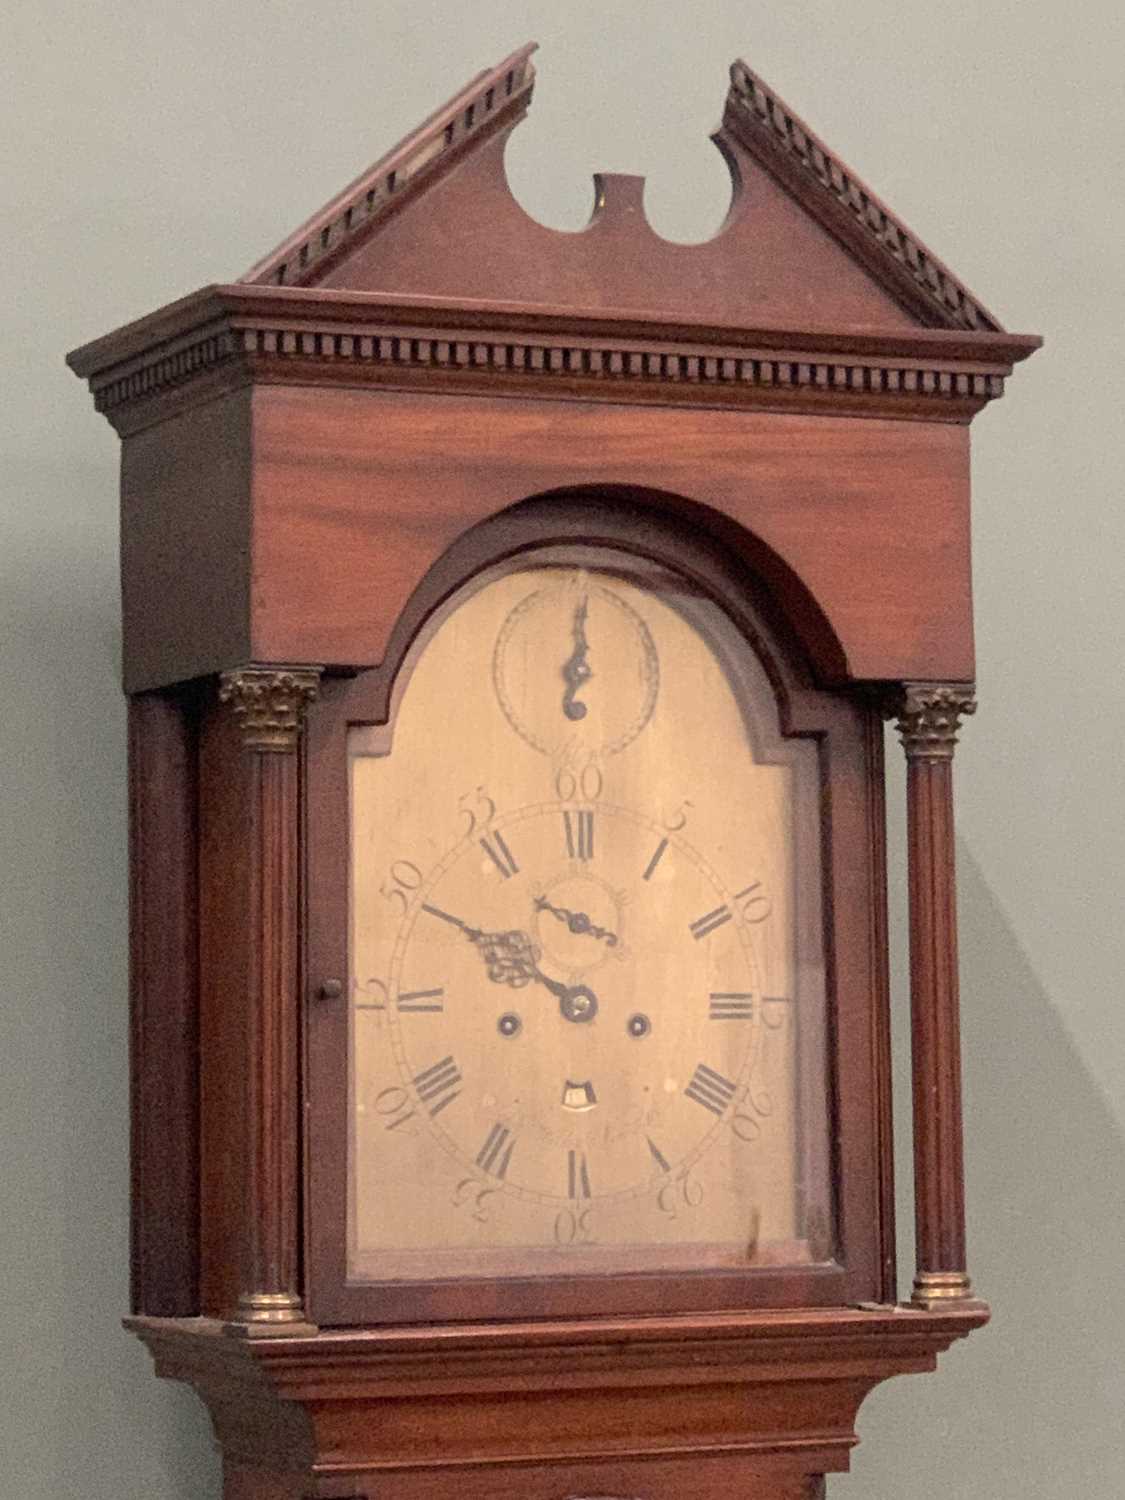 LONGCASE CLOCK - slim cased circa 1840 mahogany, arched brass dial set with Roman numerals, - Image 2 of 9